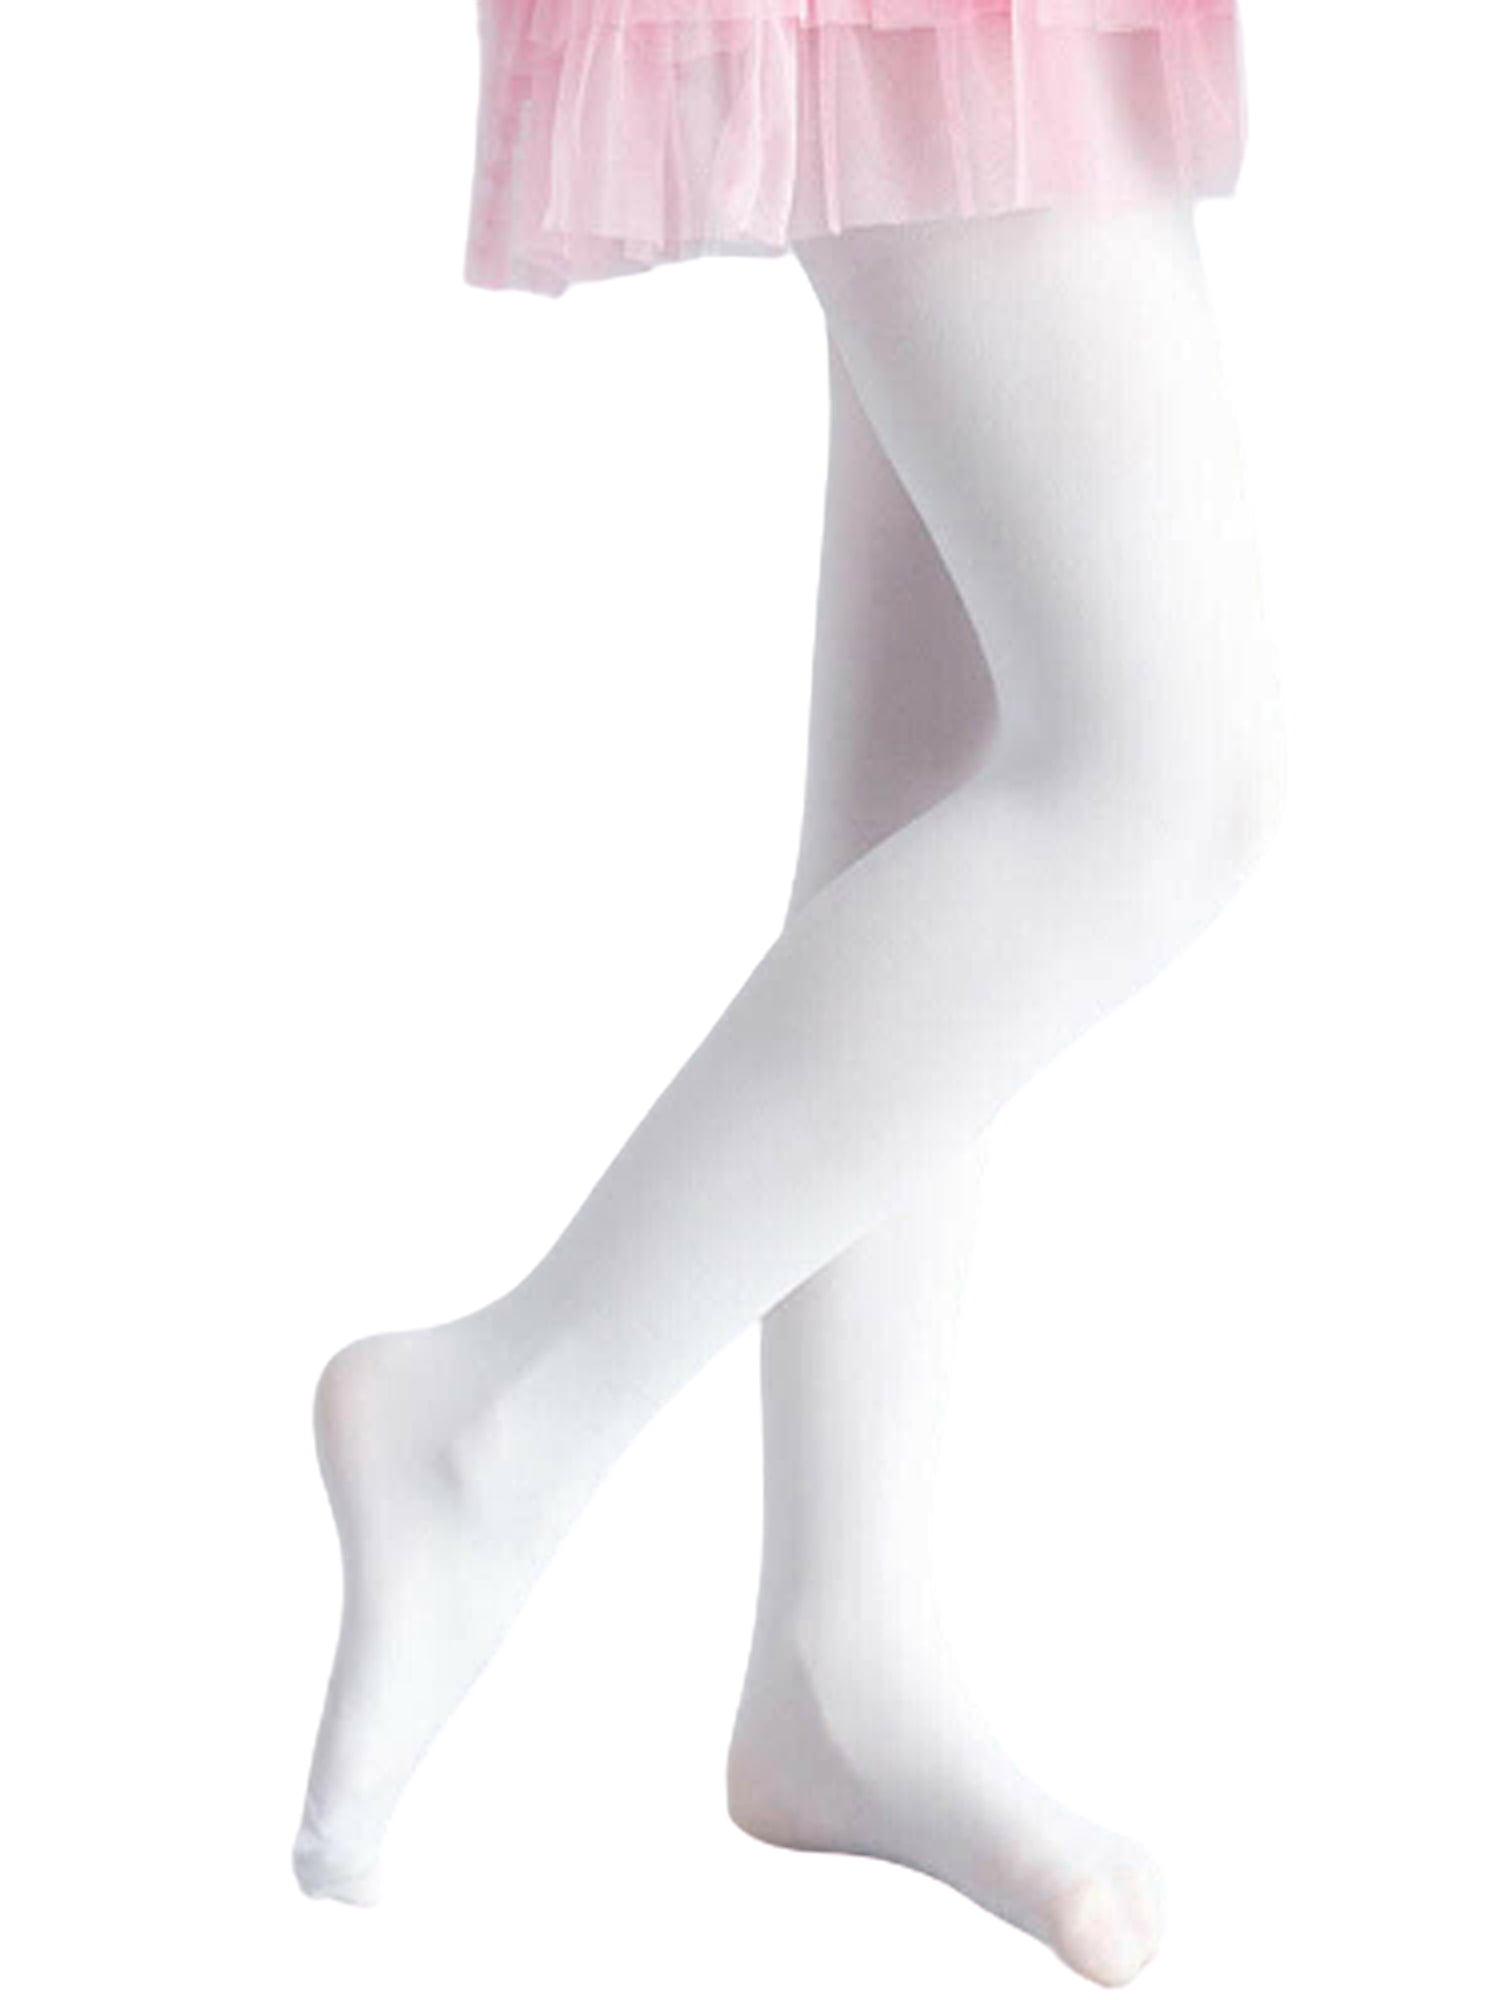 Ballet Stockings Transparent Pantyhose Candy Color white flesh for kids  Toddler Summer New Children Girls Stockings Tights - Price history & Review, AliExpress Seller - Shop4101005 Store